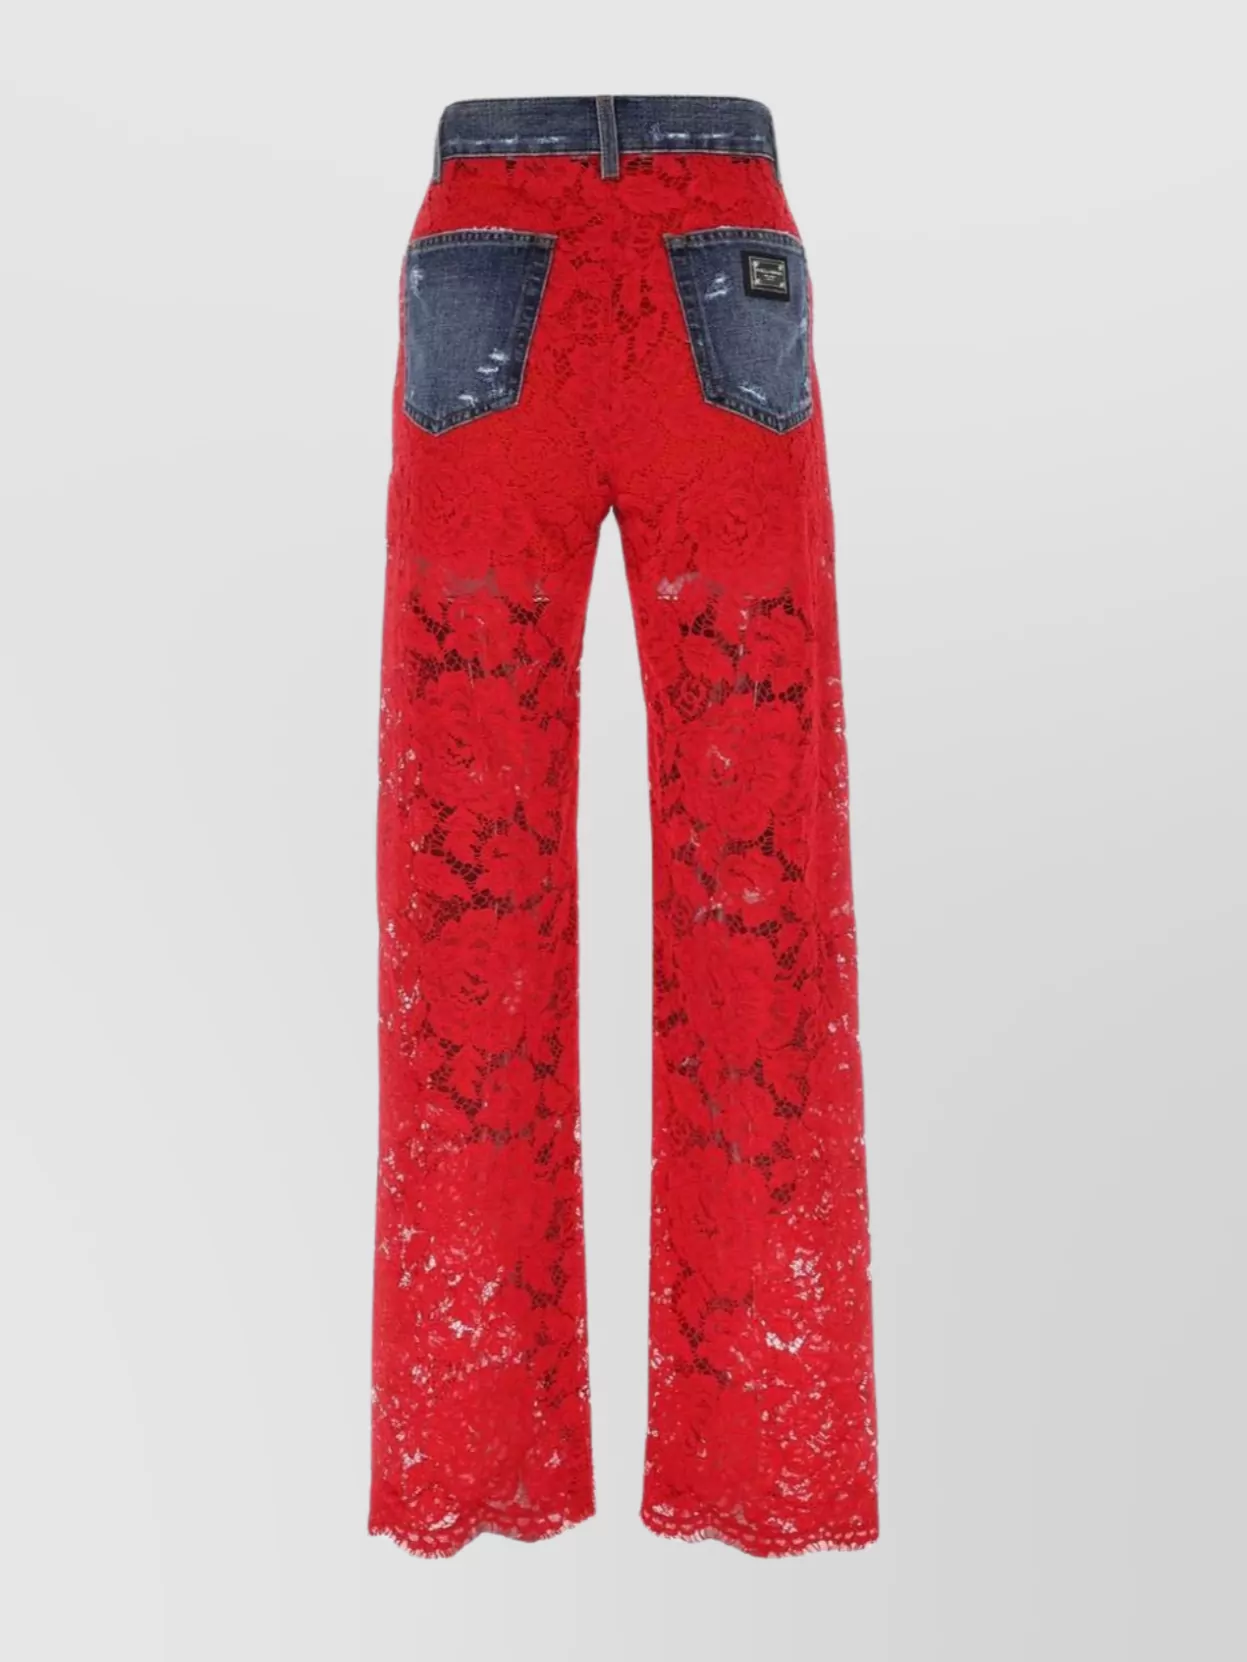 Dolce & Gabbana Denim And Lace Jeans With Contrasting Textures